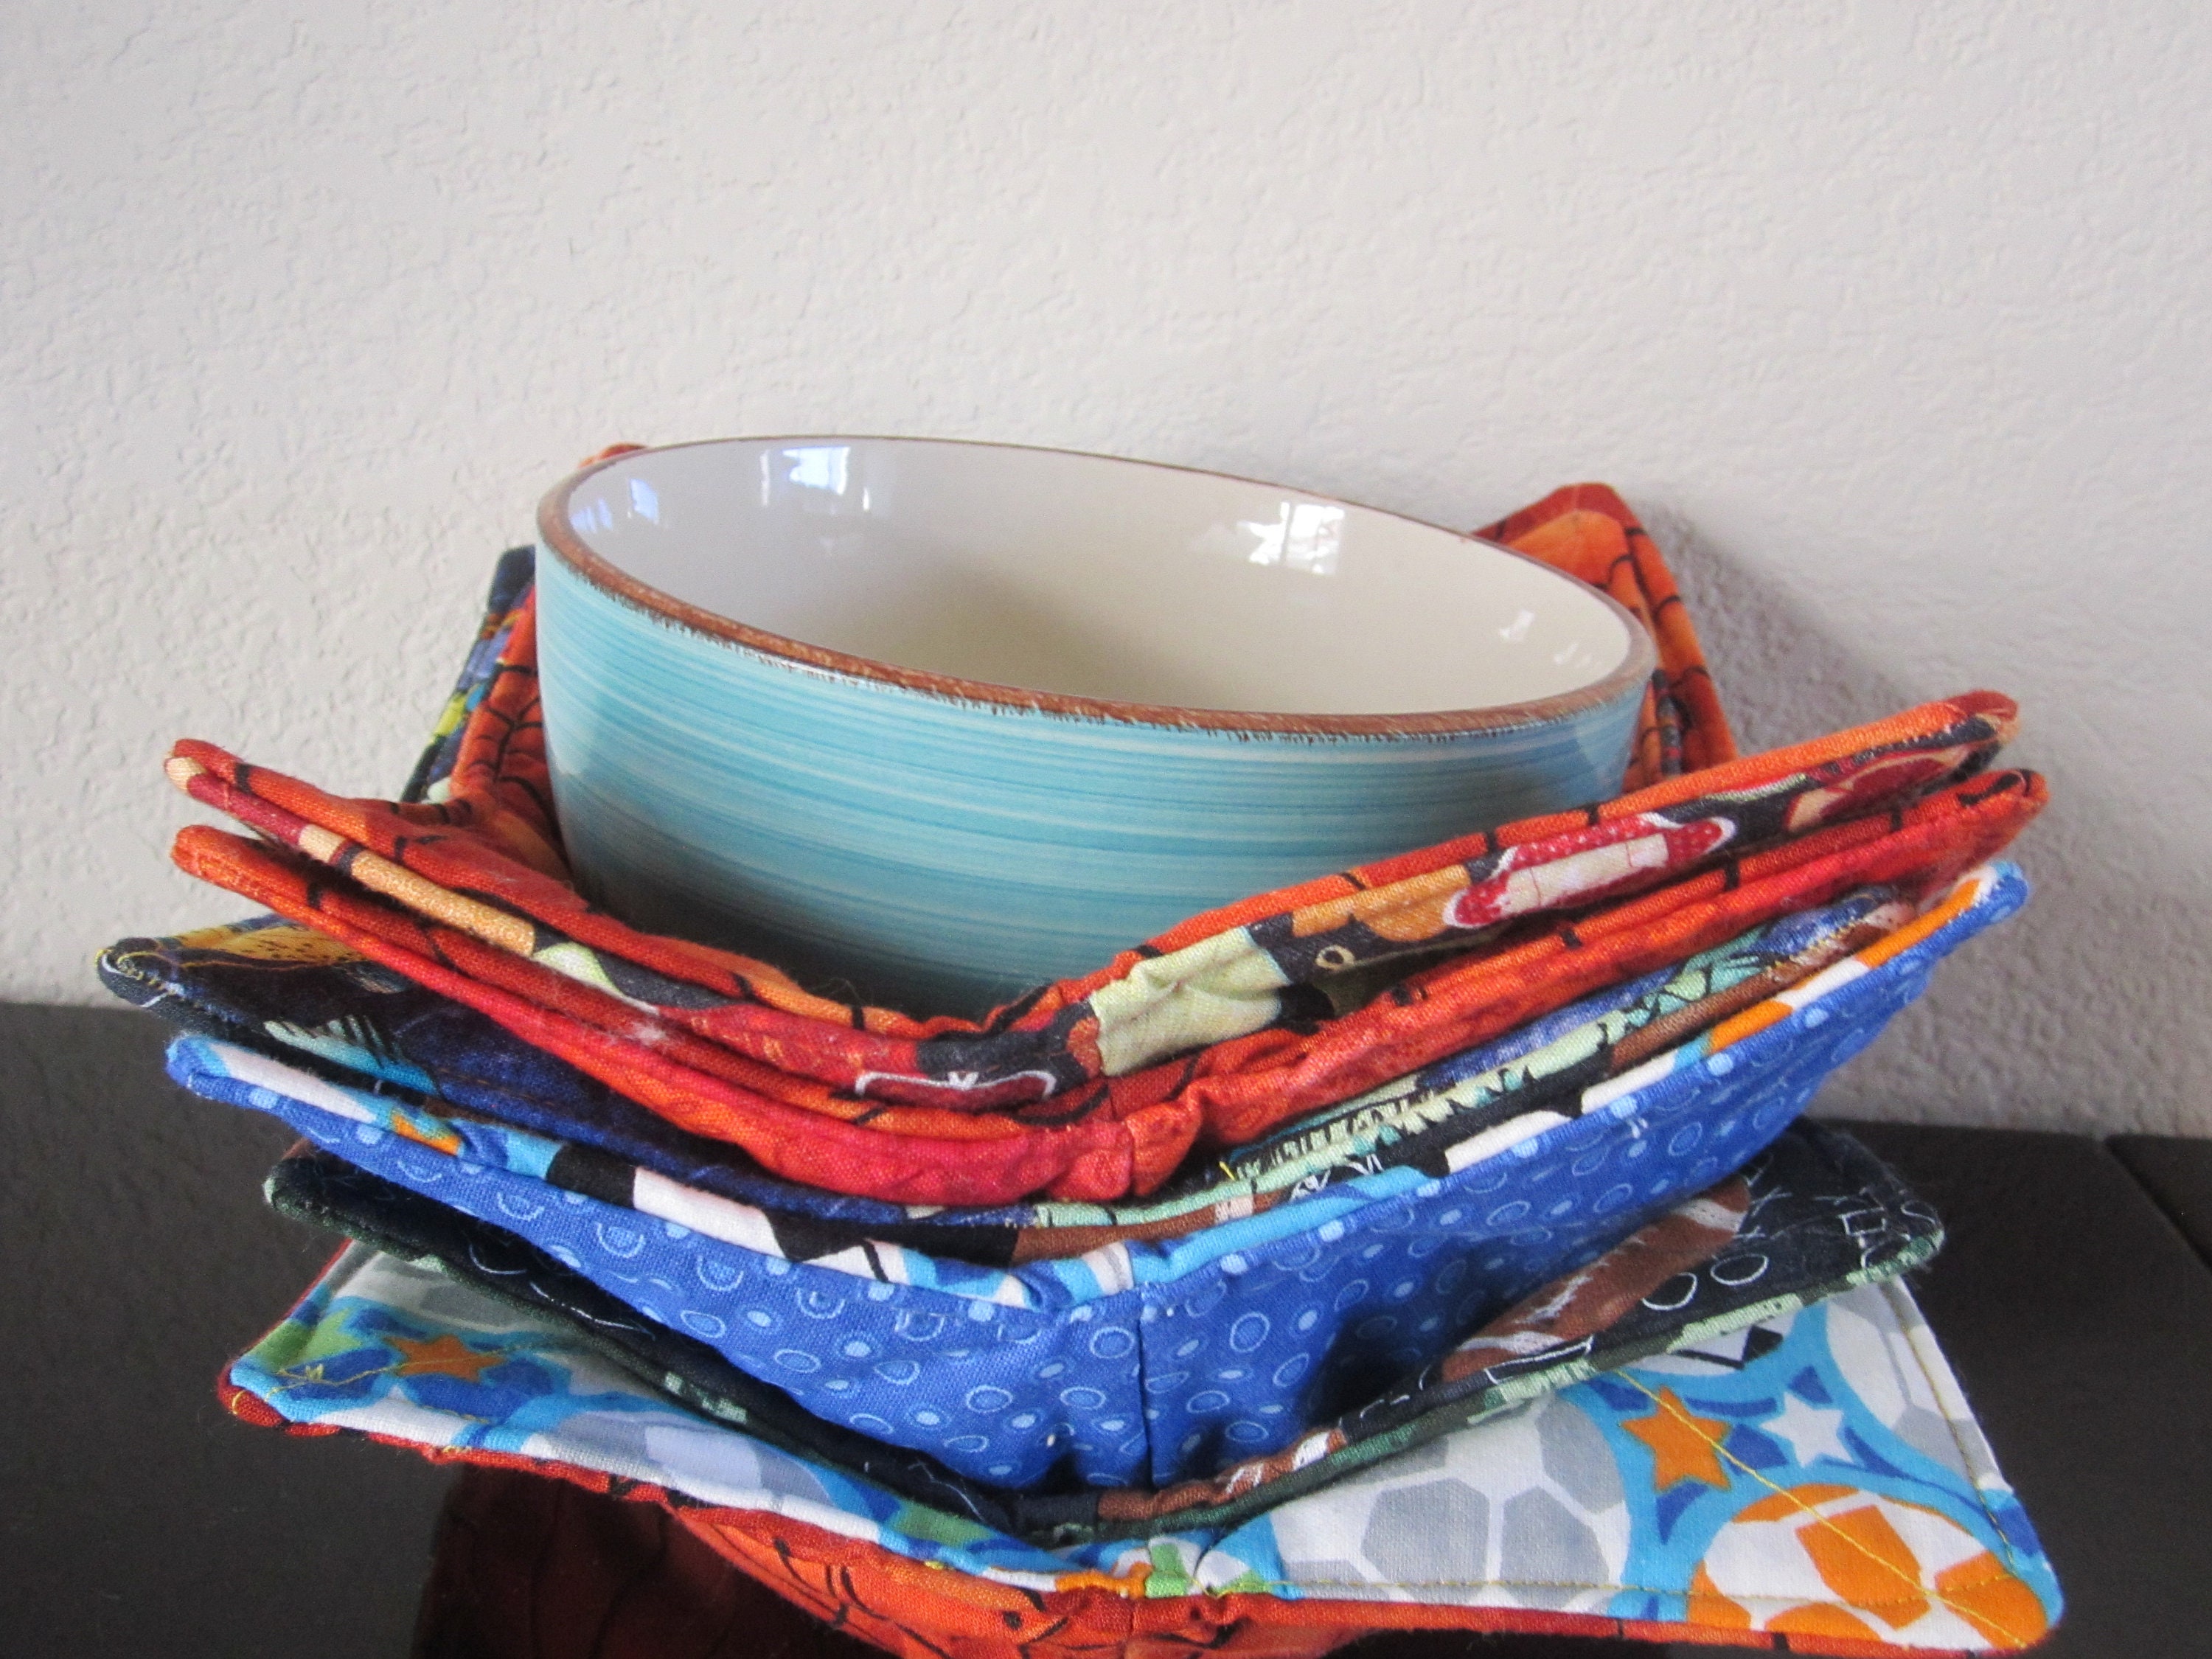 Bowl Cozies for Microwave Set of 6, Handcrafted & Quilted Bowl